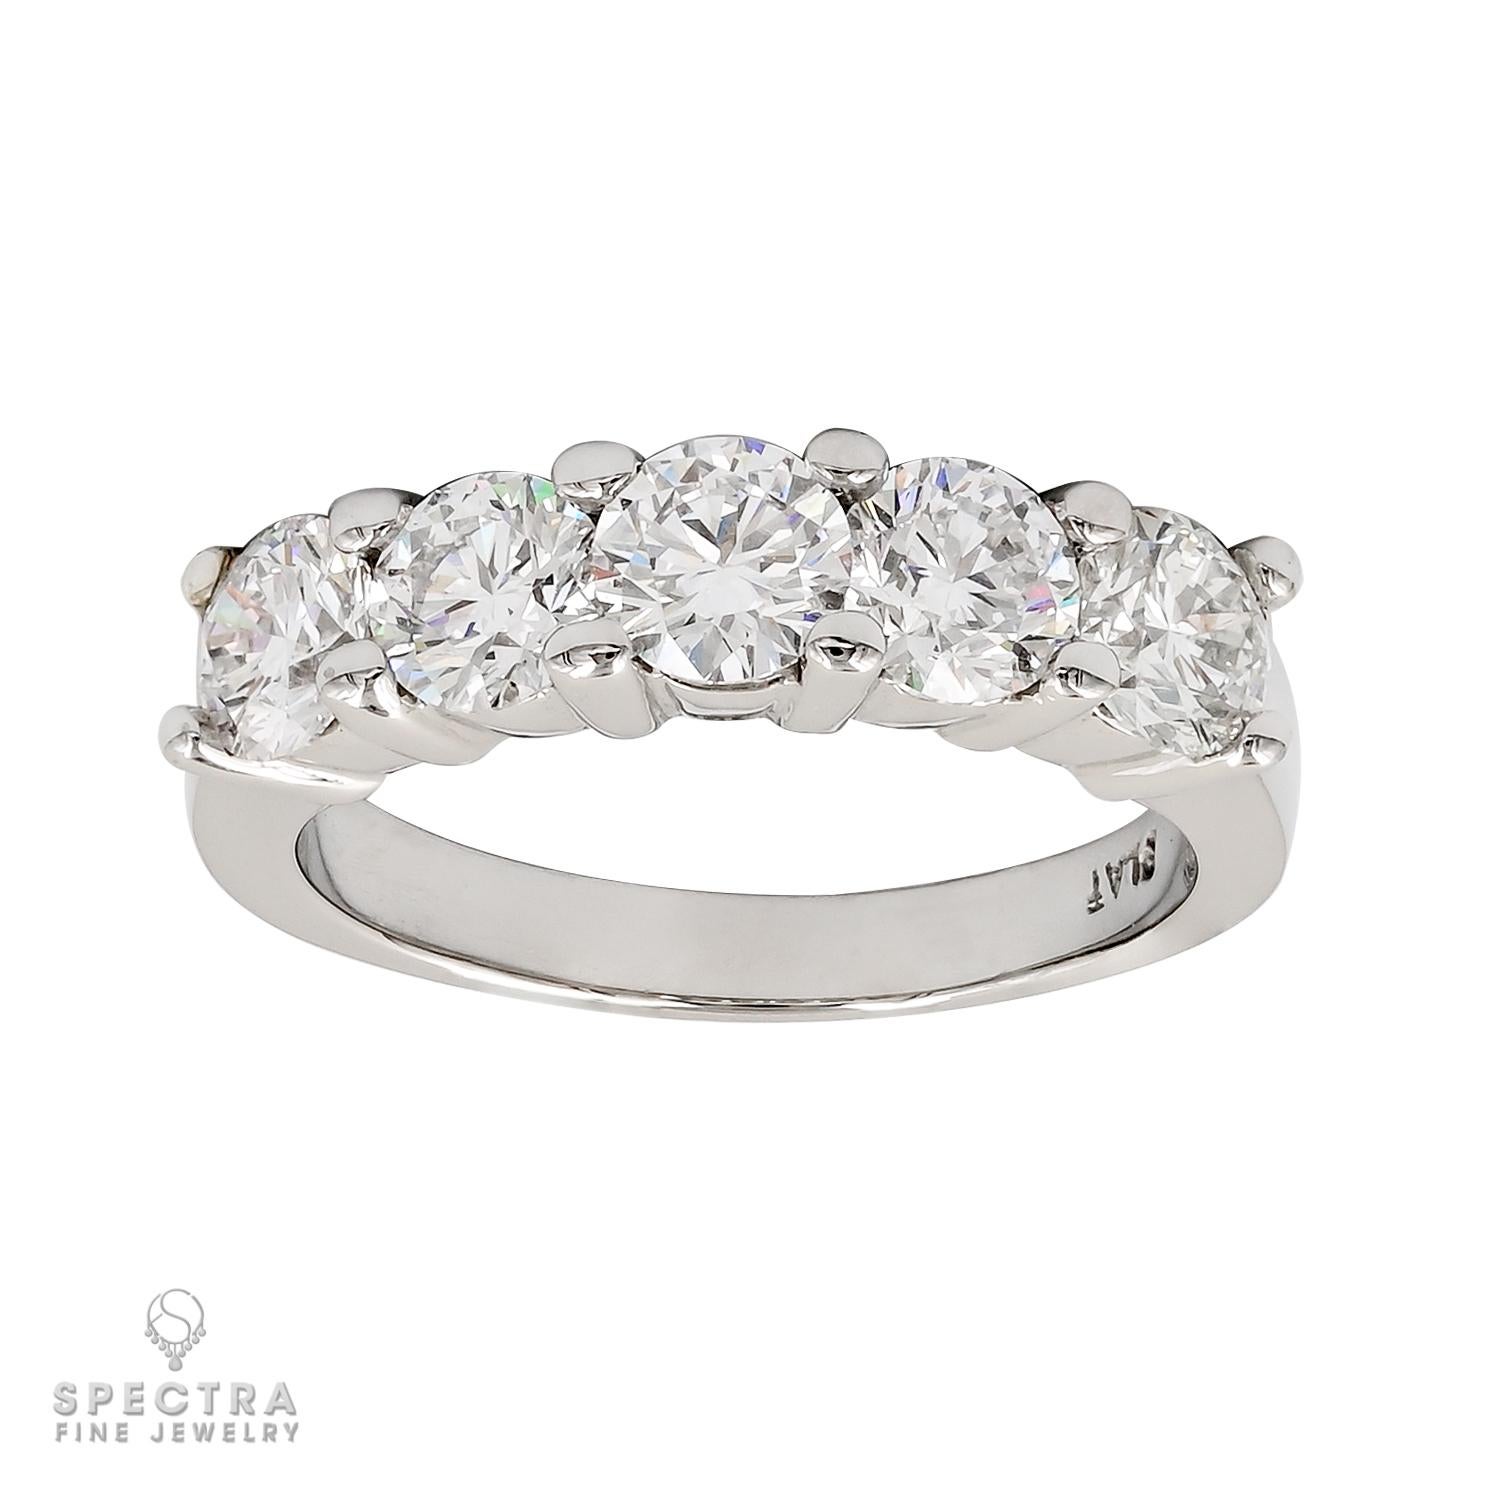 Celebrate your everlasting love with this exquisite 5-Stone Diamond Wedding Band, a symbol of enduring commitment and timeless elegance. This beautifully crafted band features five round diamonds with a total weight of 2 carats, each diamond